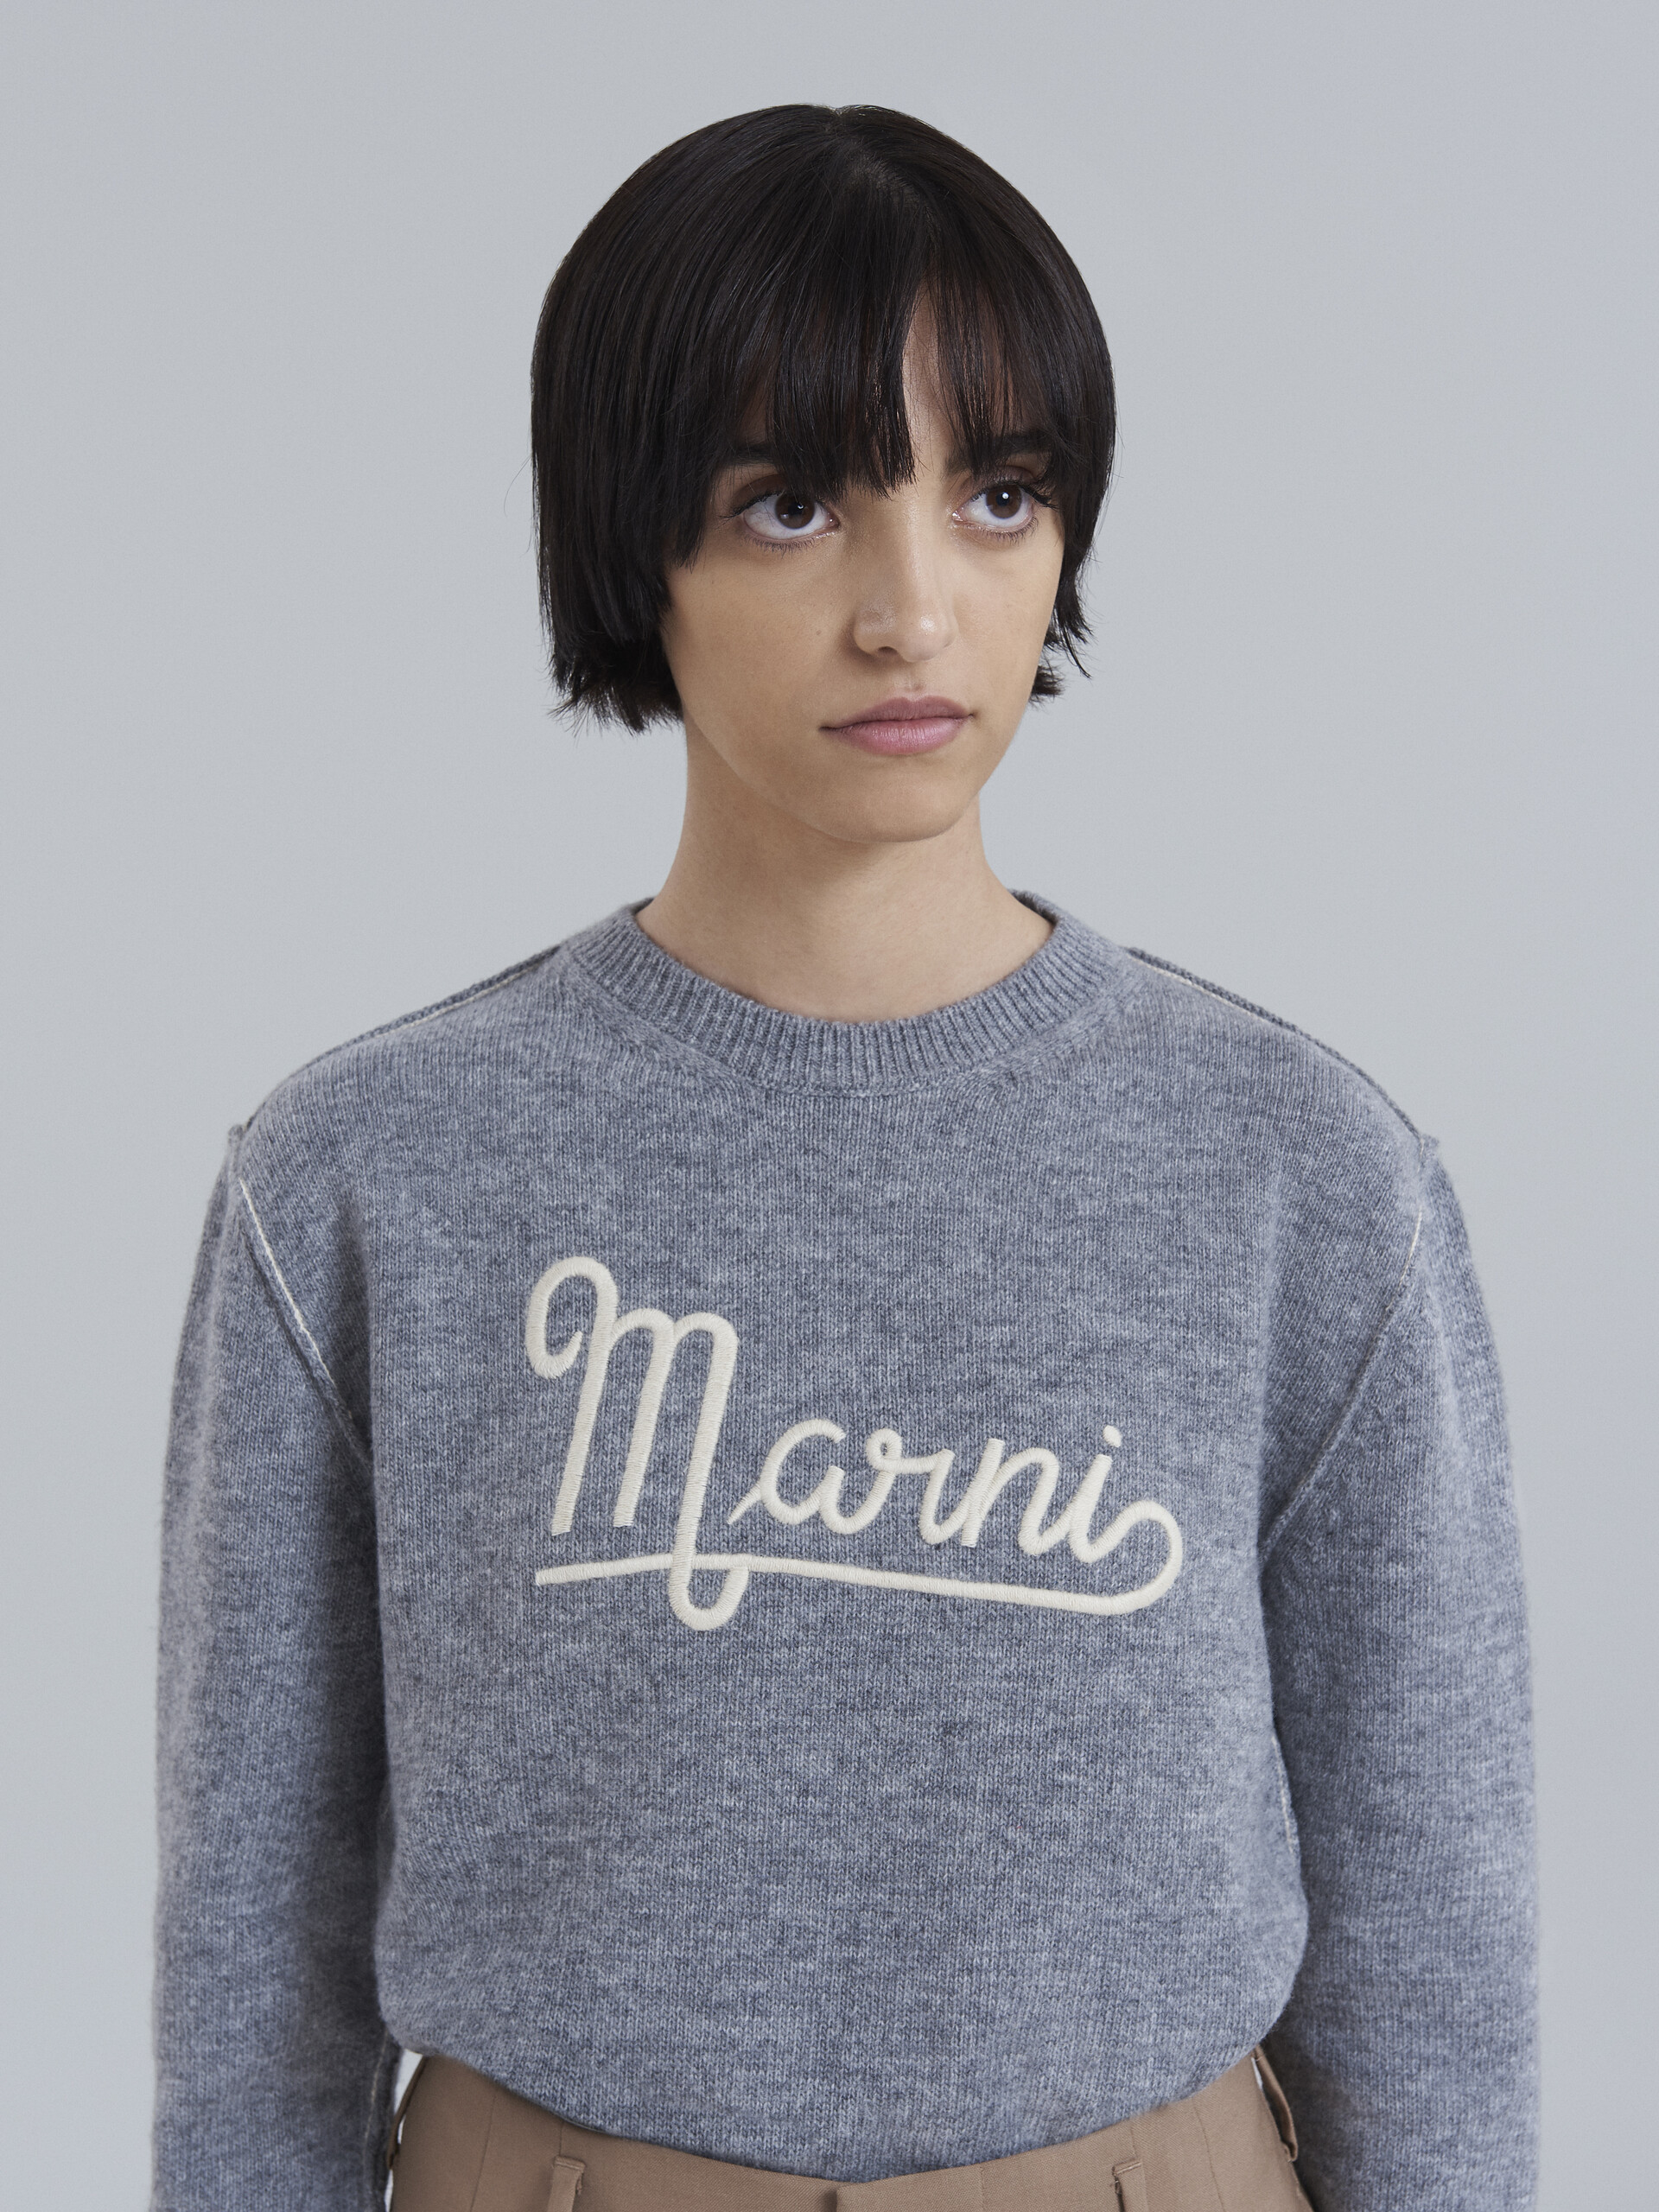 Grey Shetland wool long-sleeved sweater with embroidered Marni logo - Pullovers - Image 4